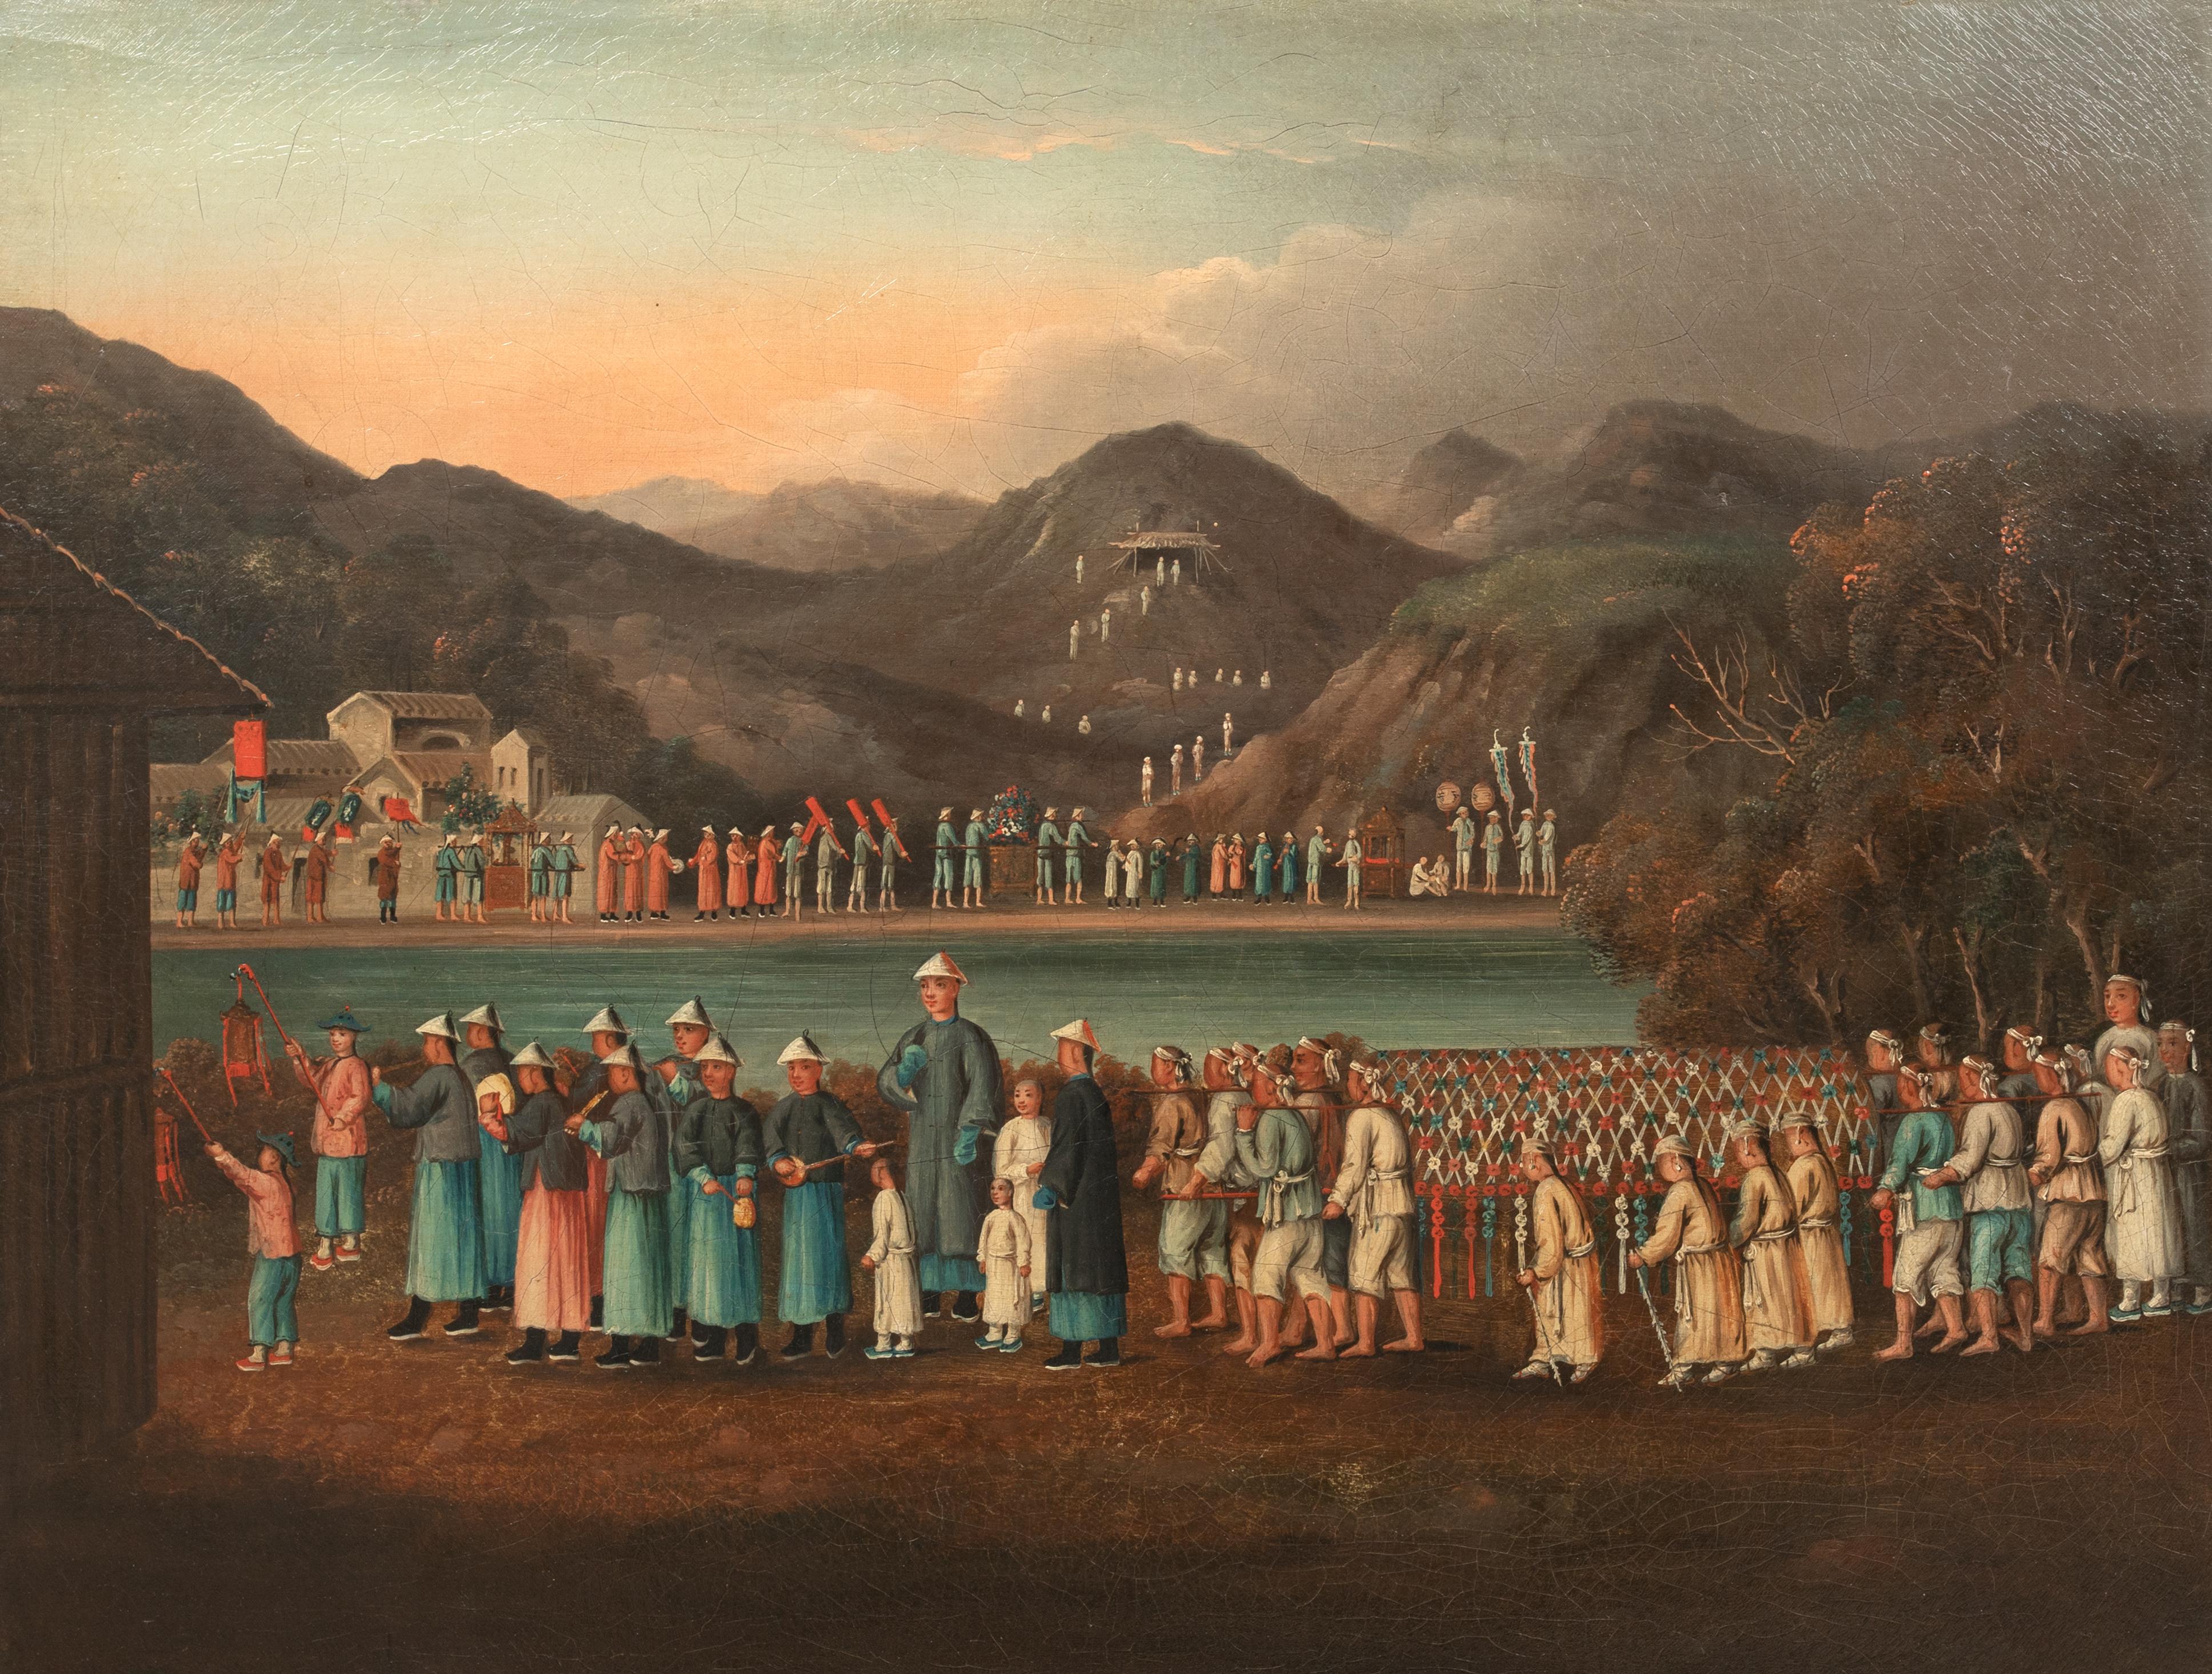 The Funeral Procession, circa 1820 

Chinese School

Large 1early 19th Century Chinese School Funeral procession landscape, oil on canvas. Good quality and condition unusual landscape view capturing figures around a lake at a funeral procession that